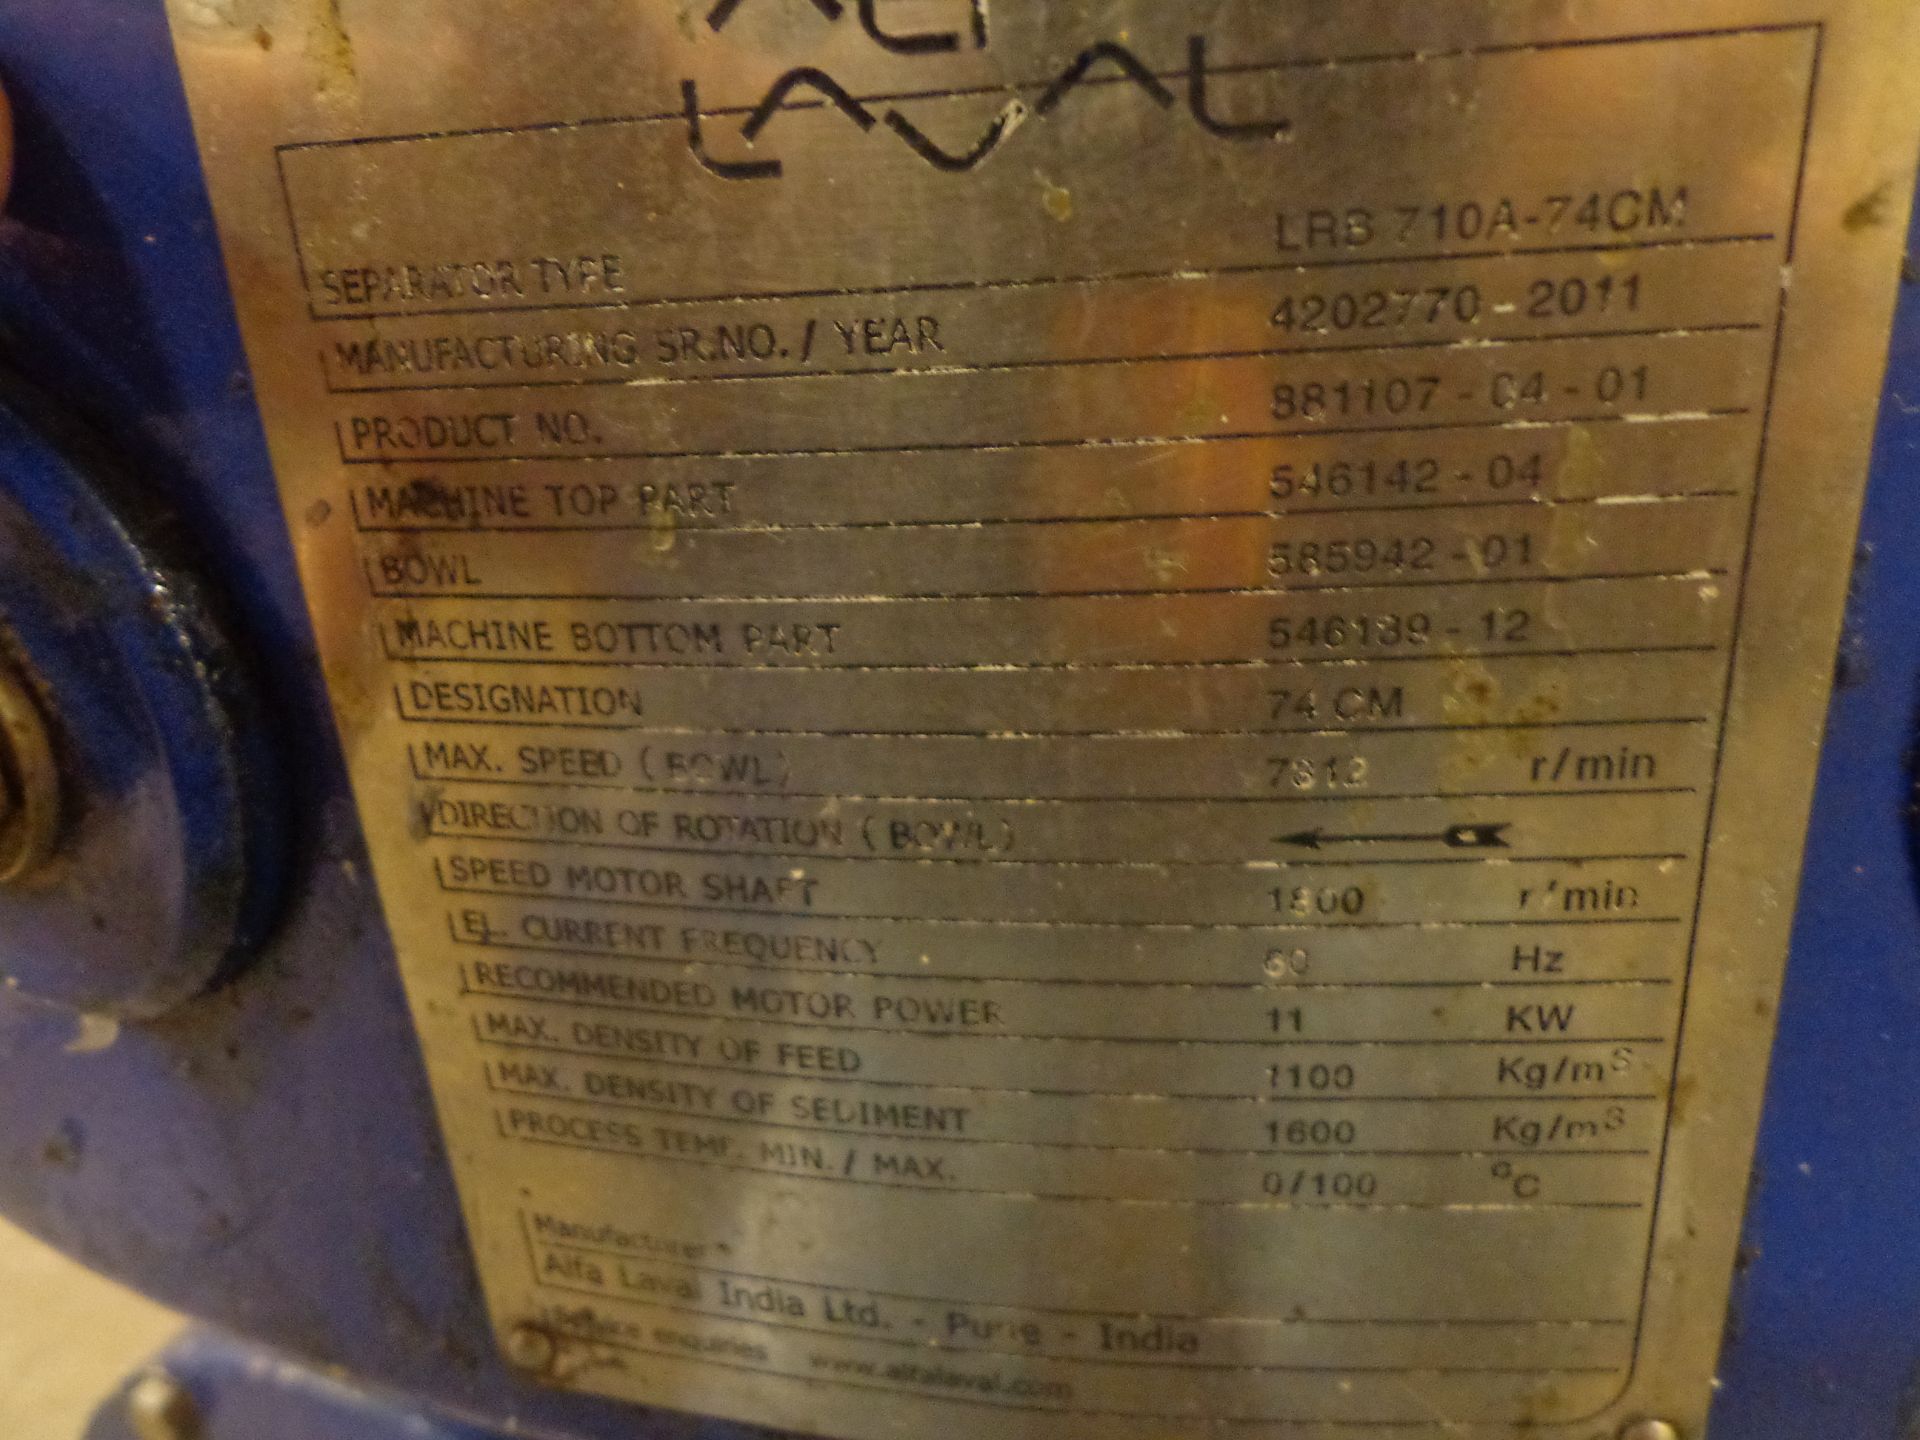 2011 ALFA LAVAL CENTRIFUGE SPERATOR TYPE LRB710A-74CM (SOLD SUBJECT TO BULK BID OFFERING) - Image 3 of 3